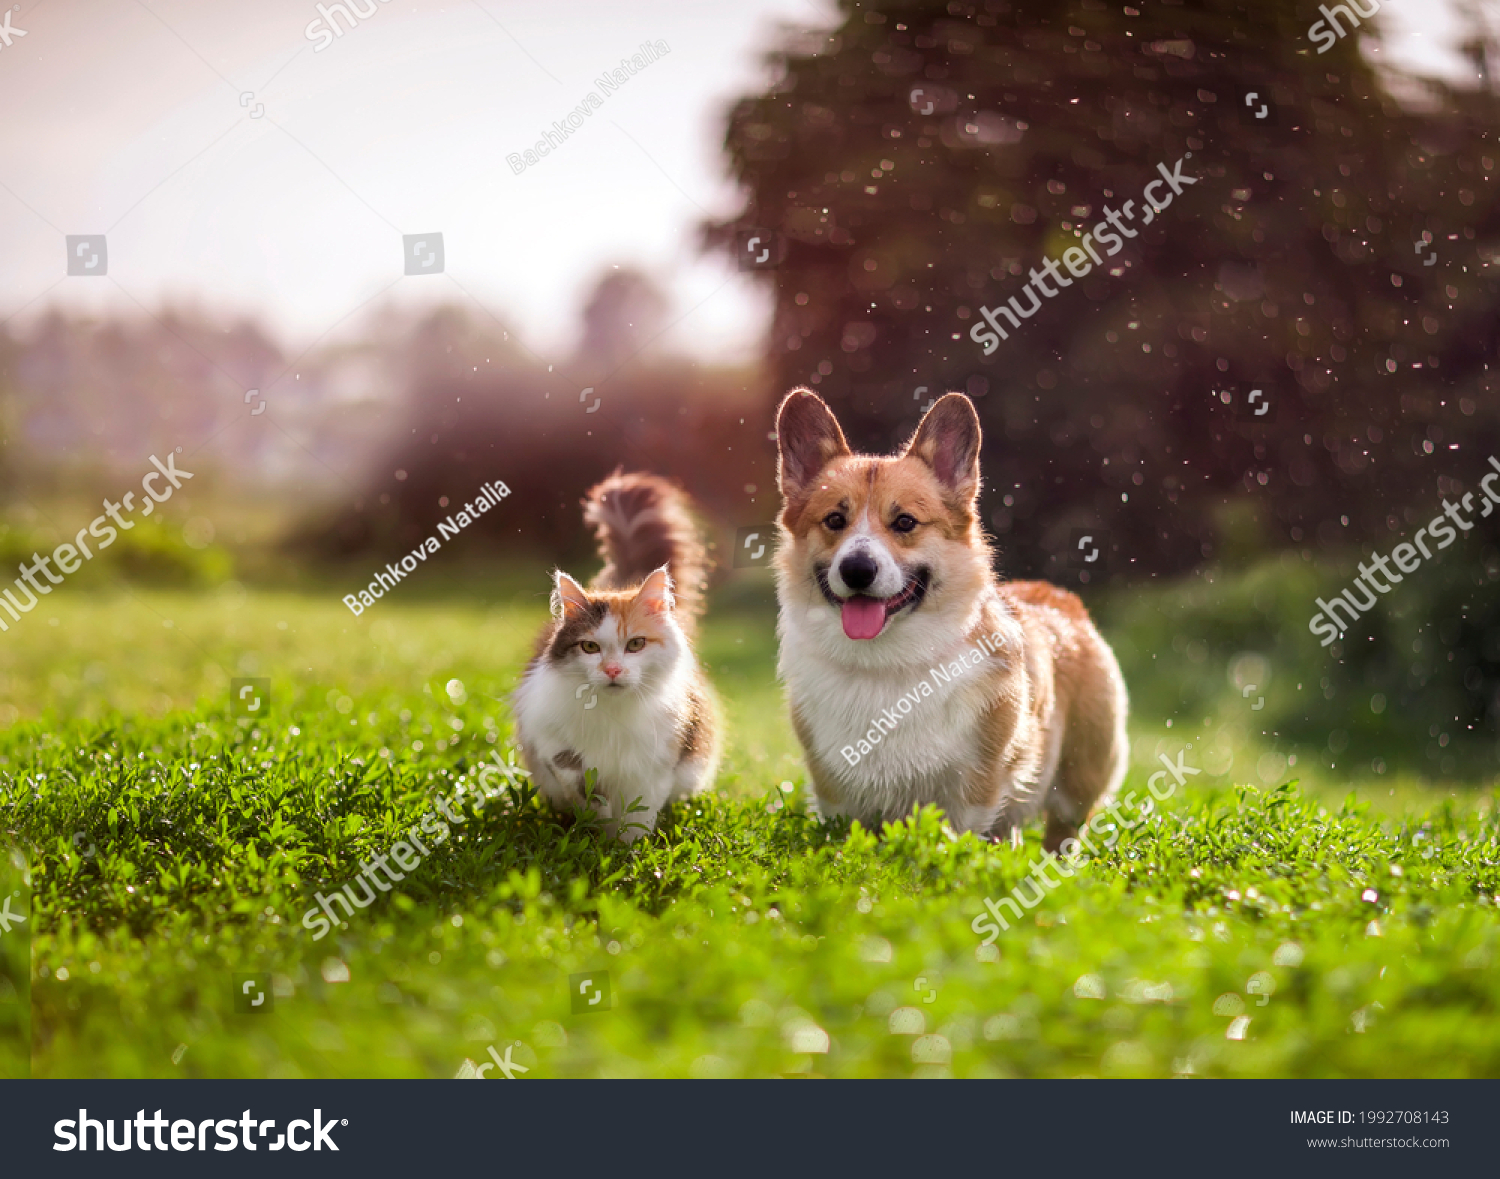 furry friends red cat and corgi dog walking in a summer meadow under the drops of warm rain #1992708143